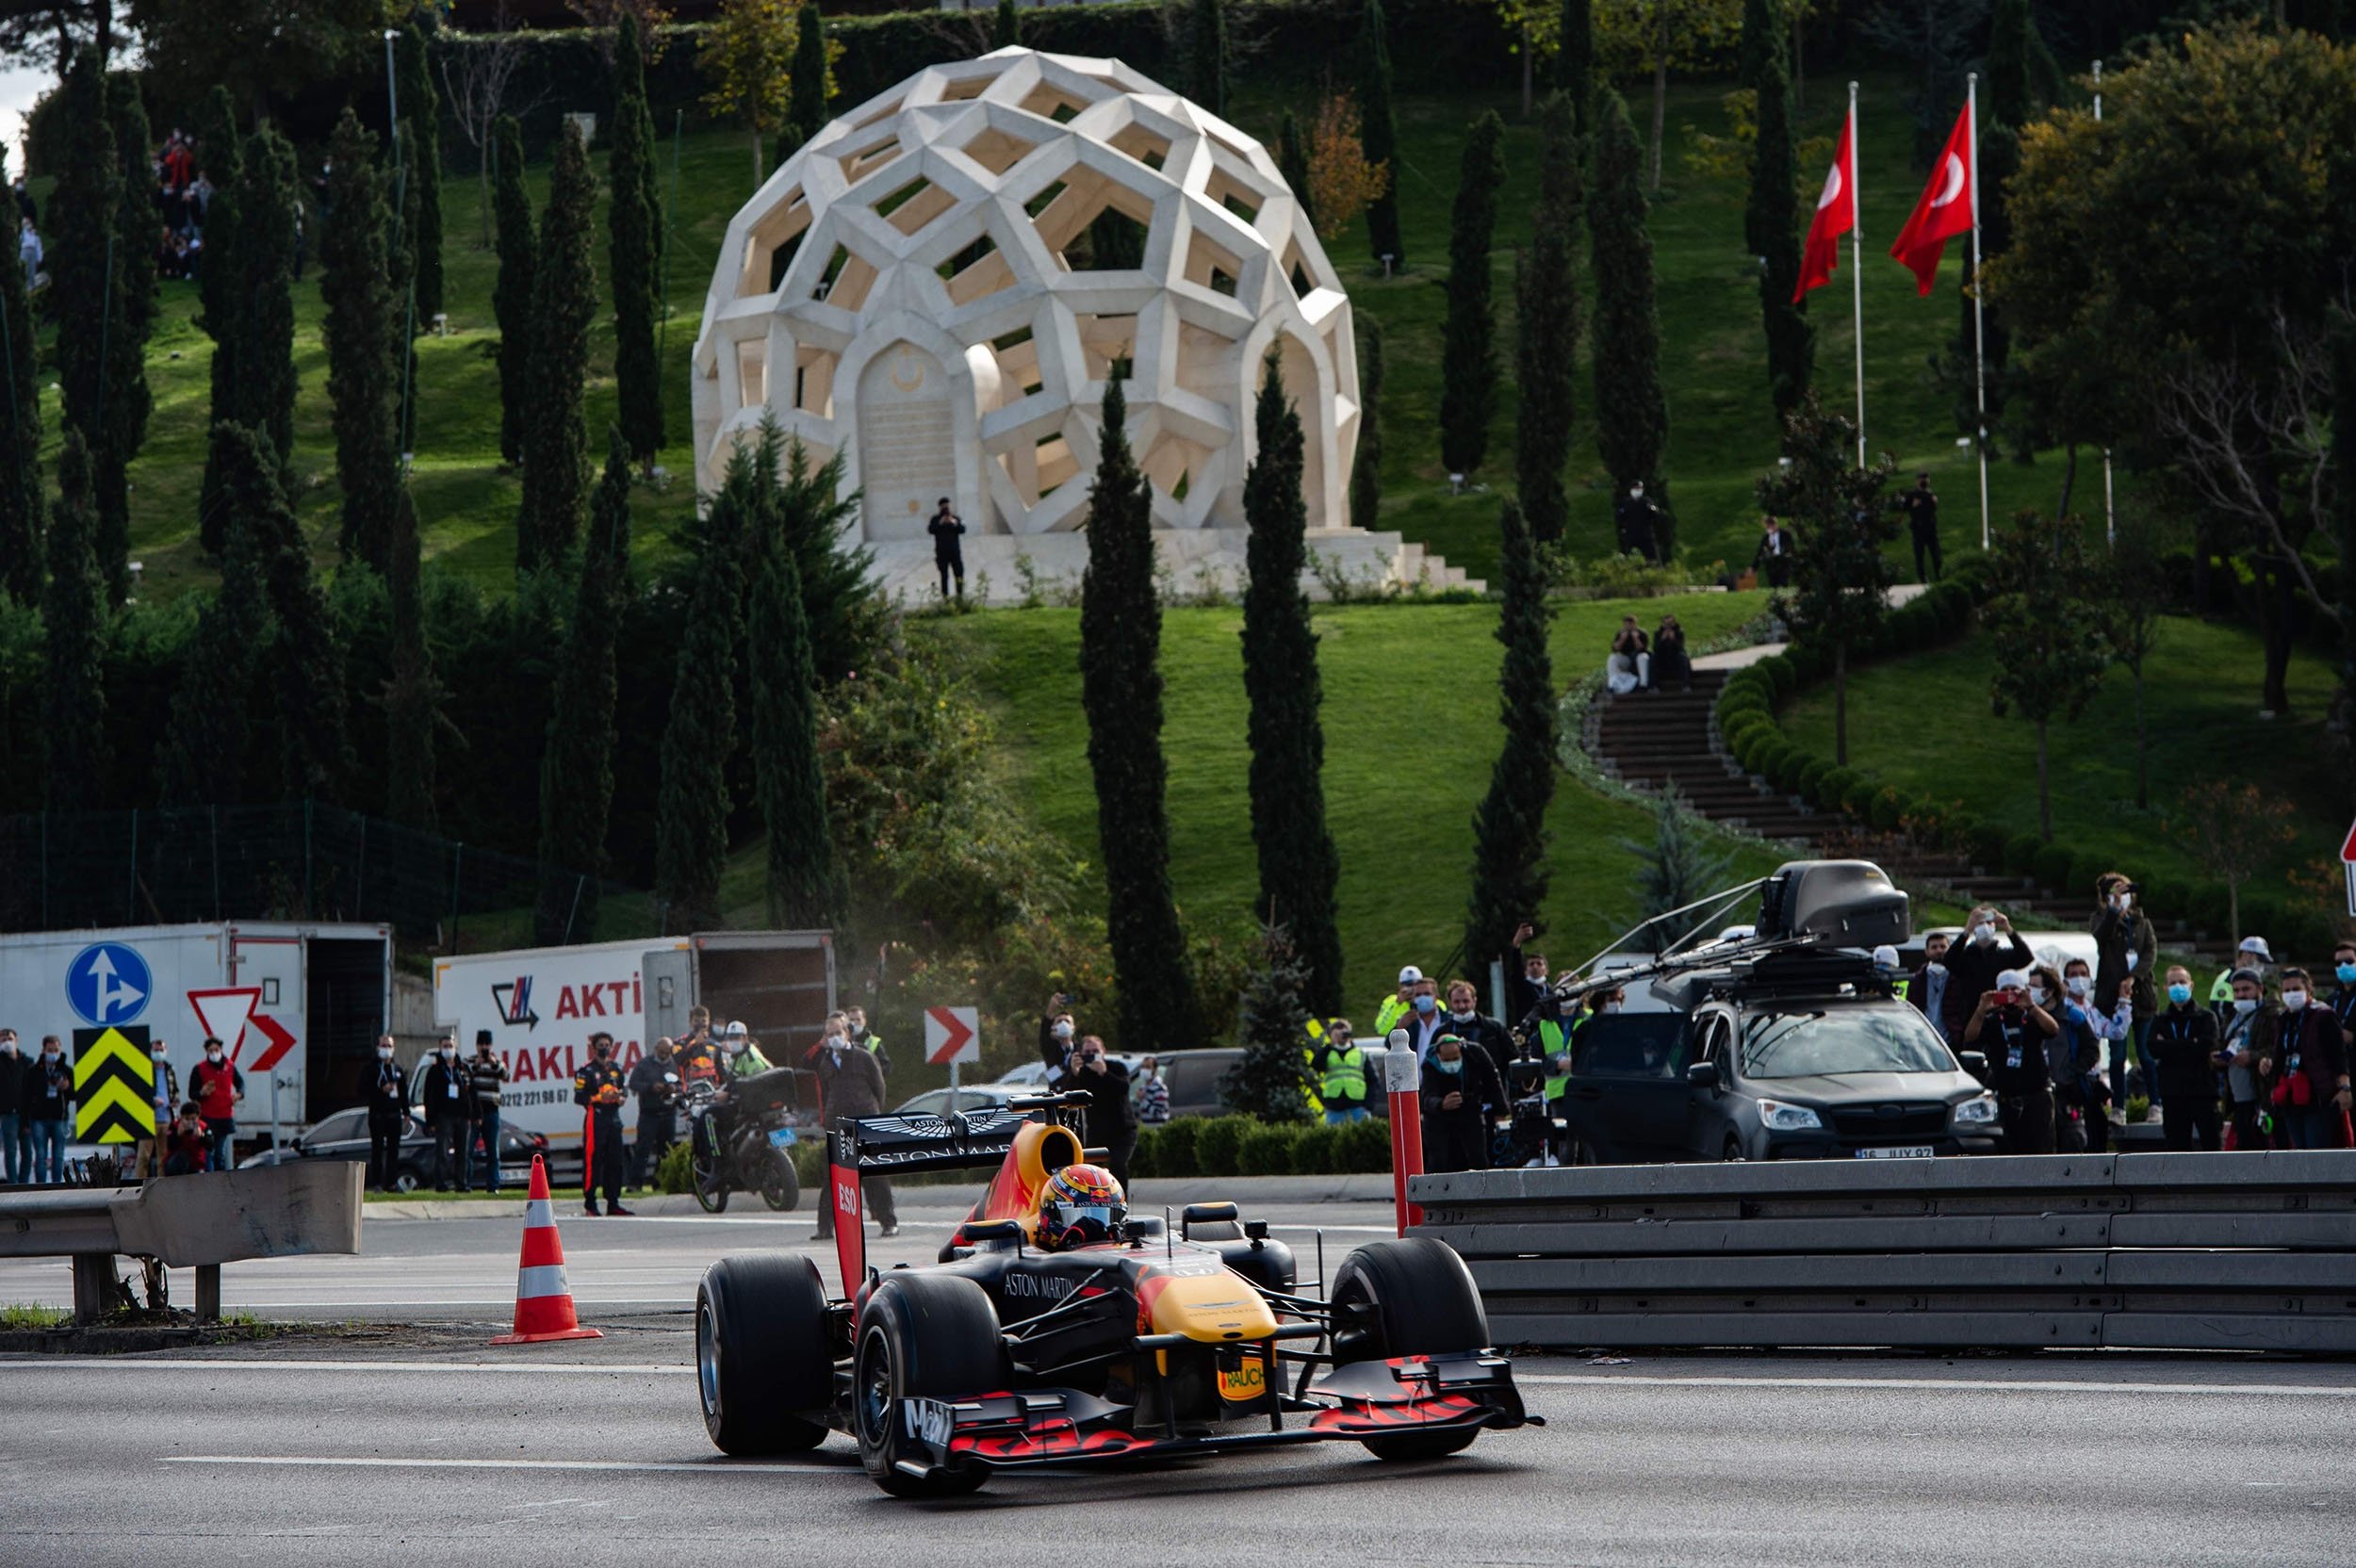 Mosques, bridges and Formula 1 cars Istanbul streets see F1 action